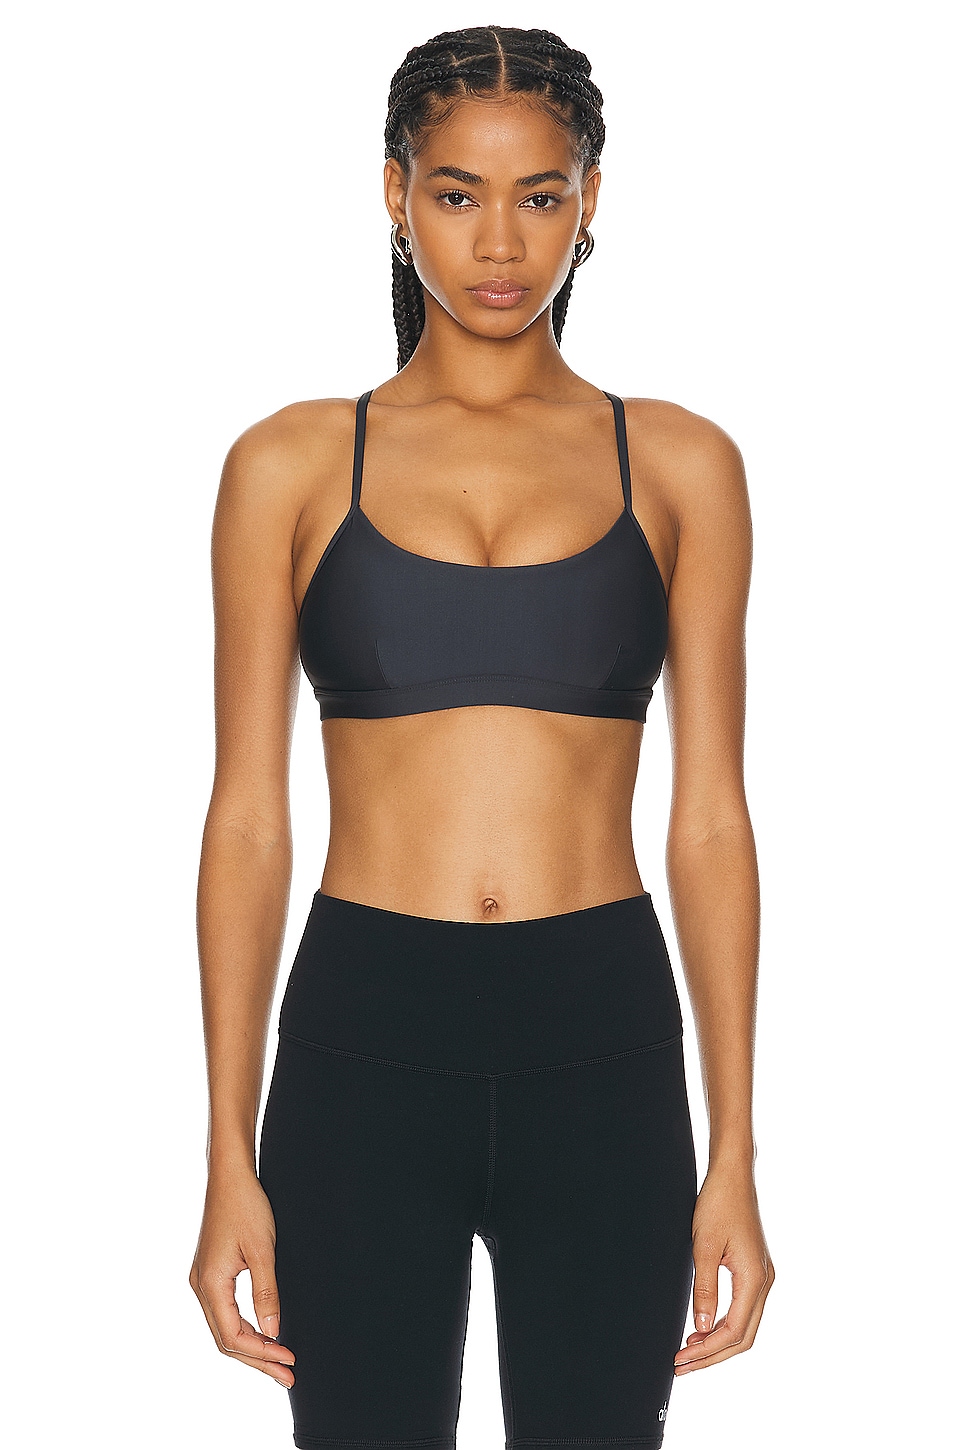 Airlift Intrigue Bra in Charcoal